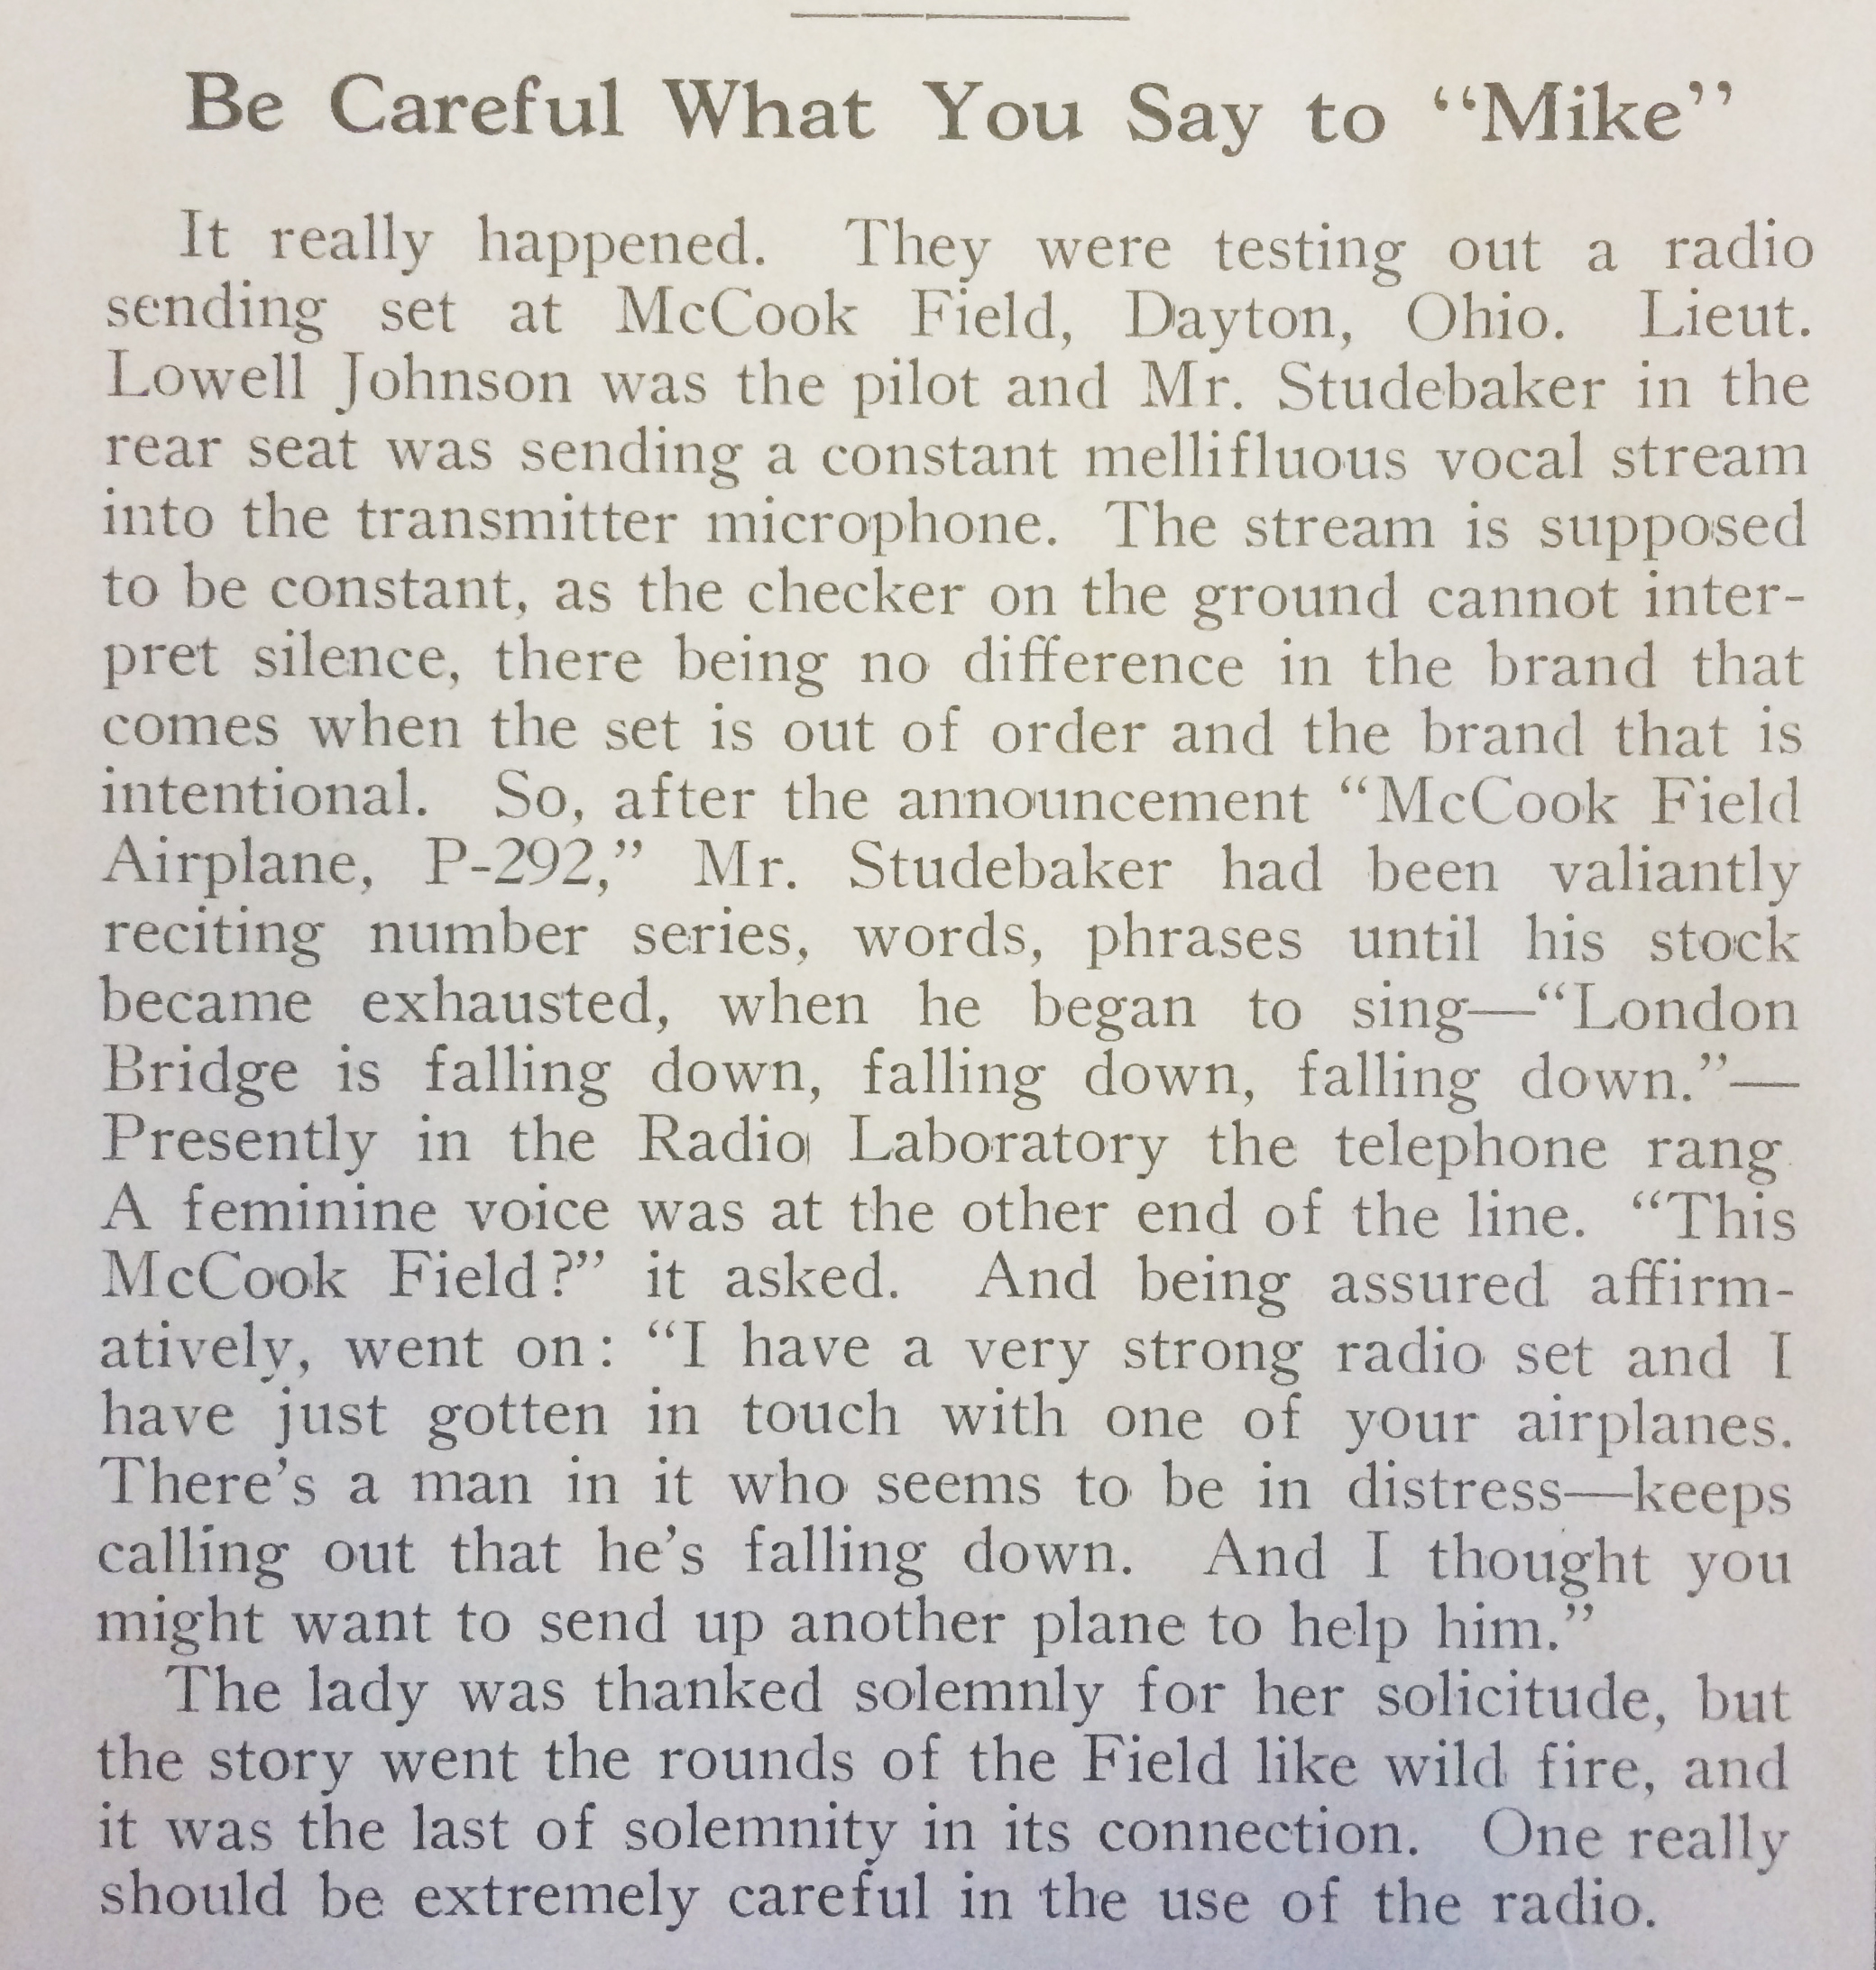 Be Careful What You Say to Mike, Slipstream 5:6 (July 1924), 22, from MS-53 Fred Marshall Papers 8:3.